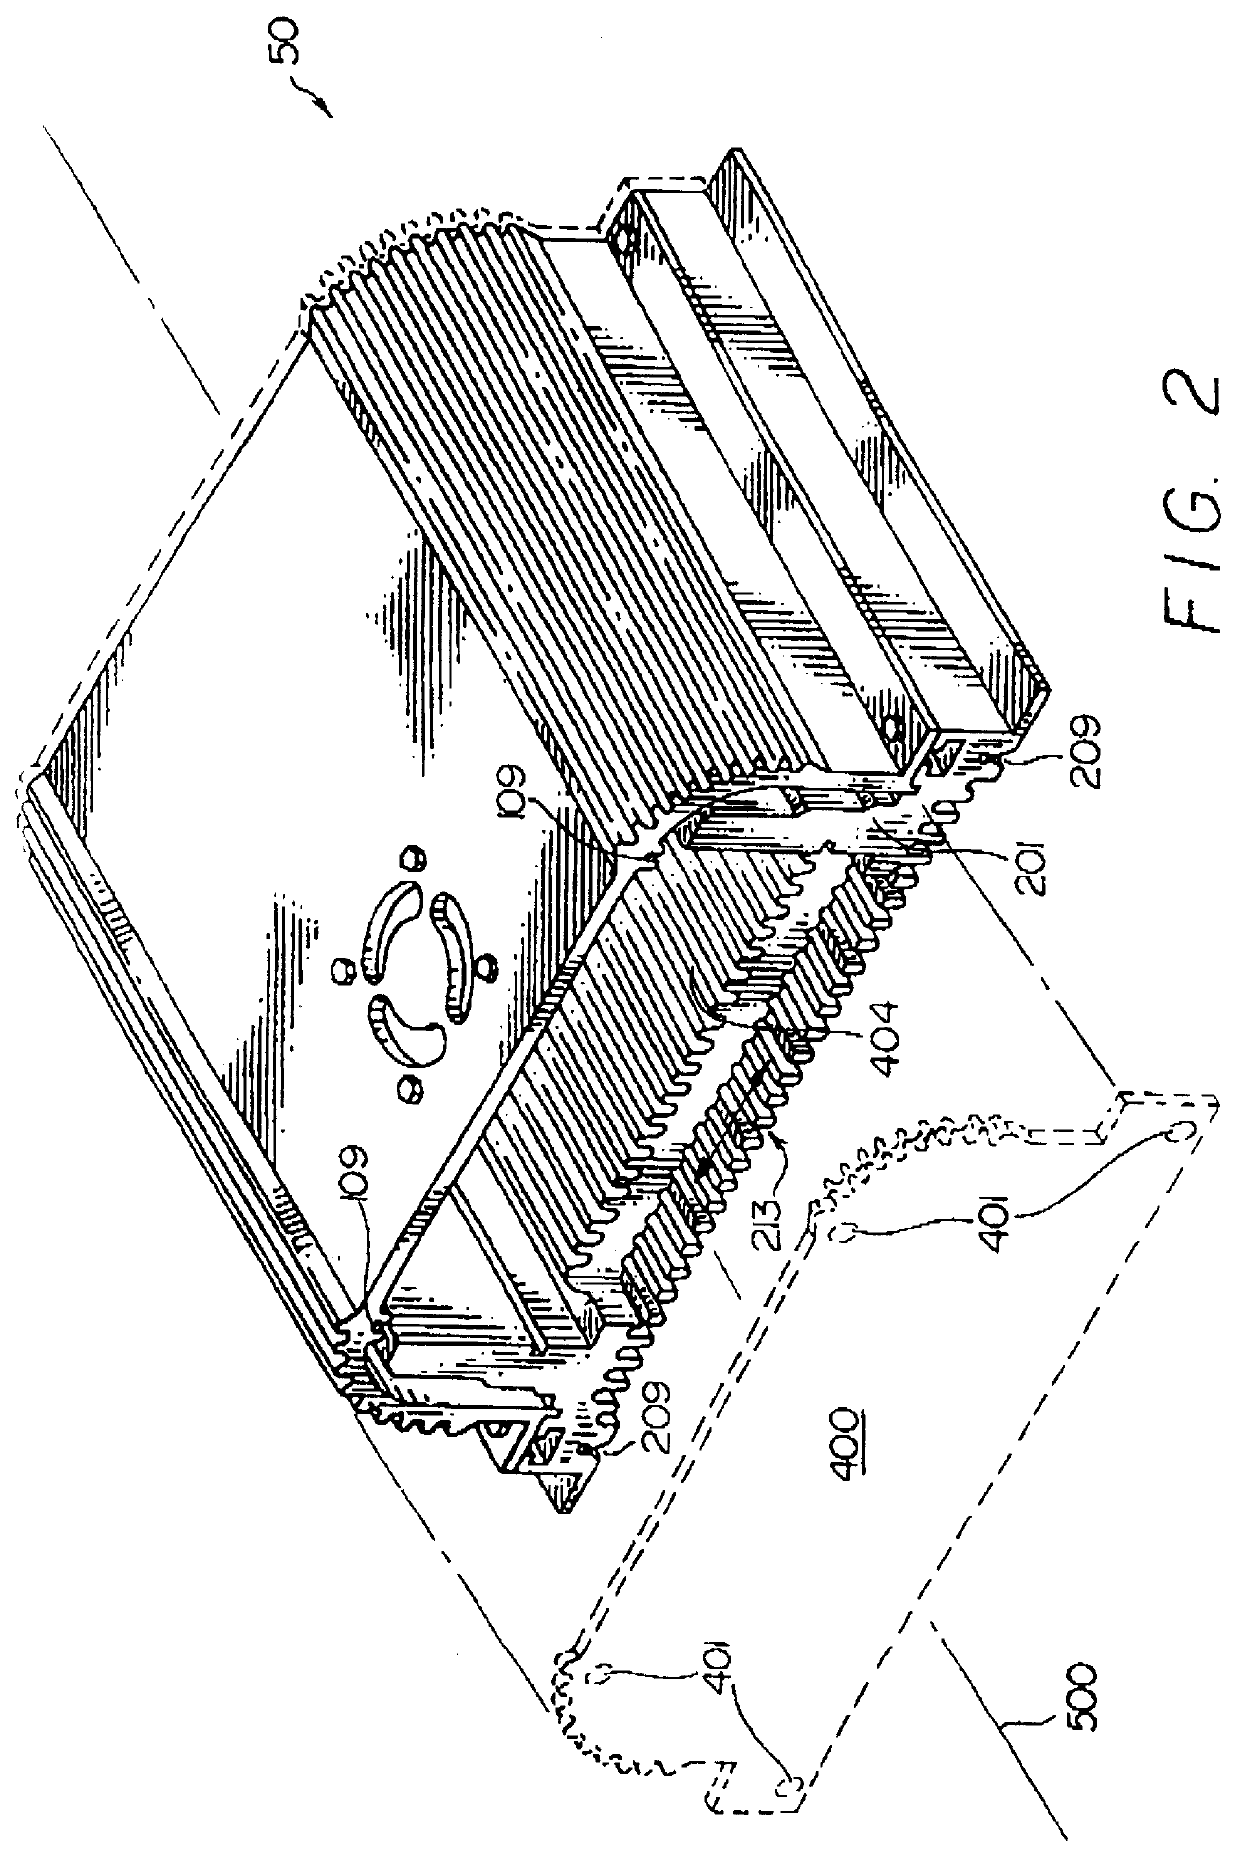 Heat dissipating housing for electronic components